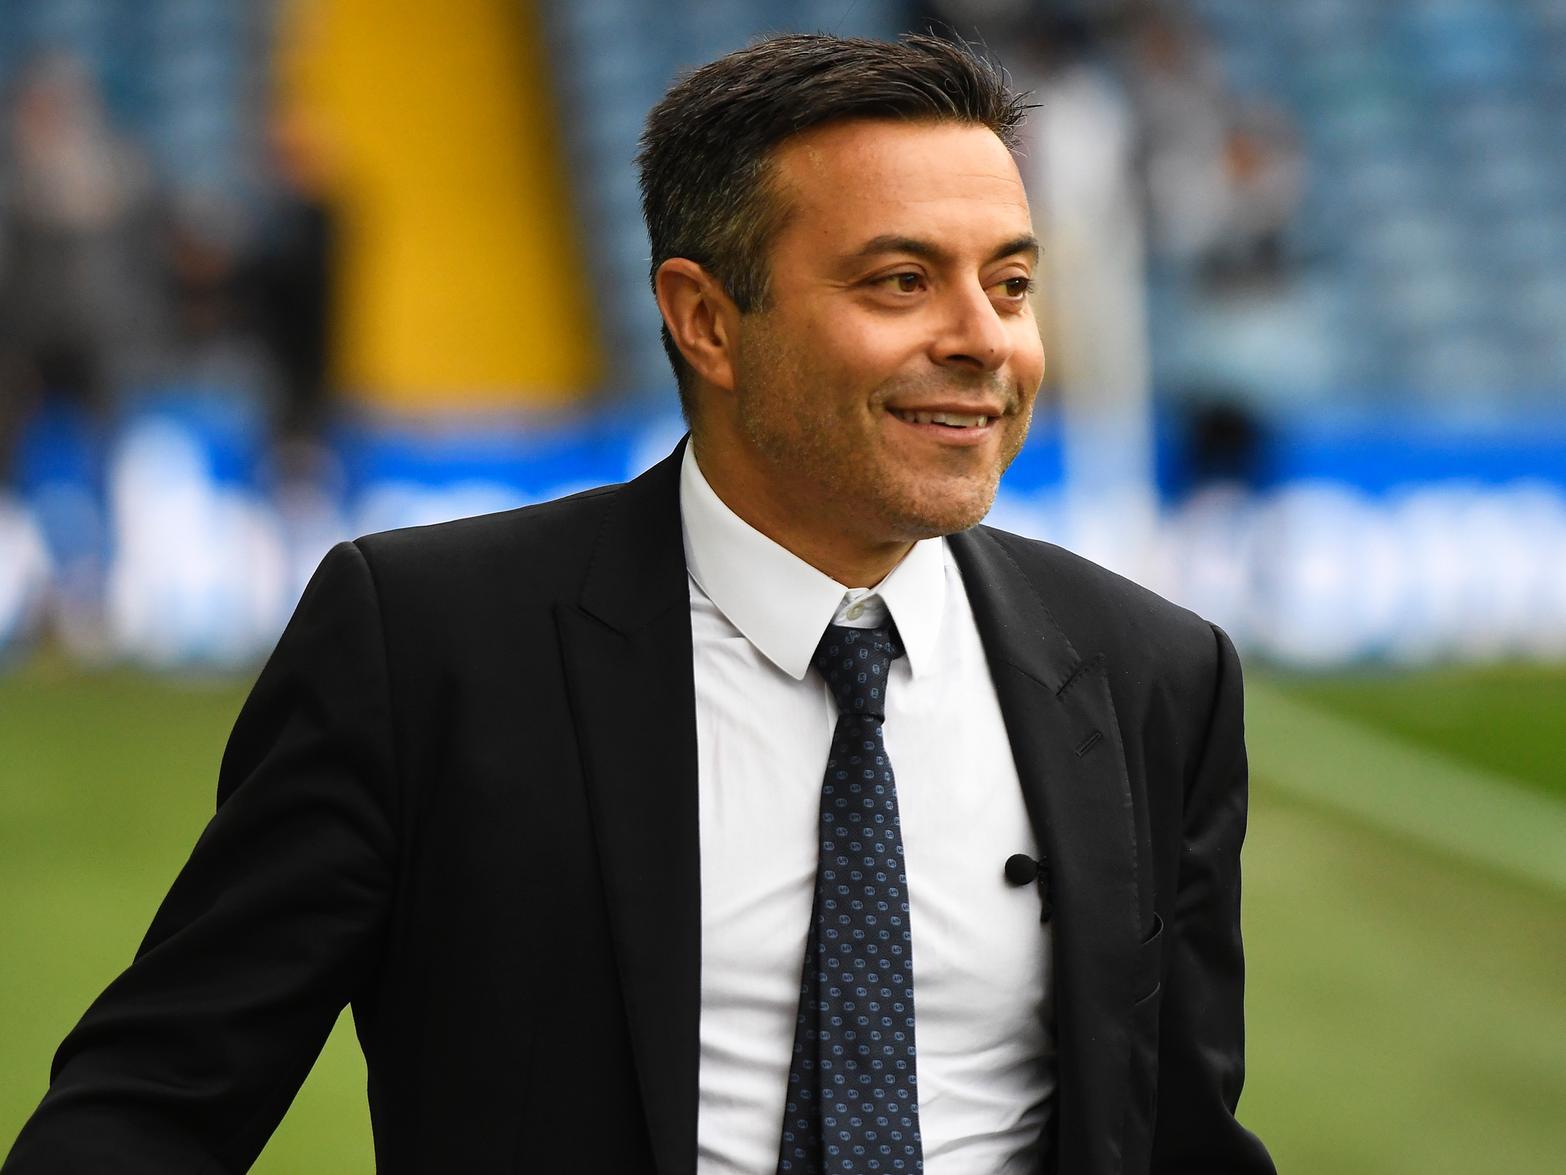 Leeds United owner Andrea Radrizzani is said to be determinedto keep 'significant' control of the club if he sells a stake to QSI, which could dent hopes of the club receivinga large scale investment. (Football Insider)